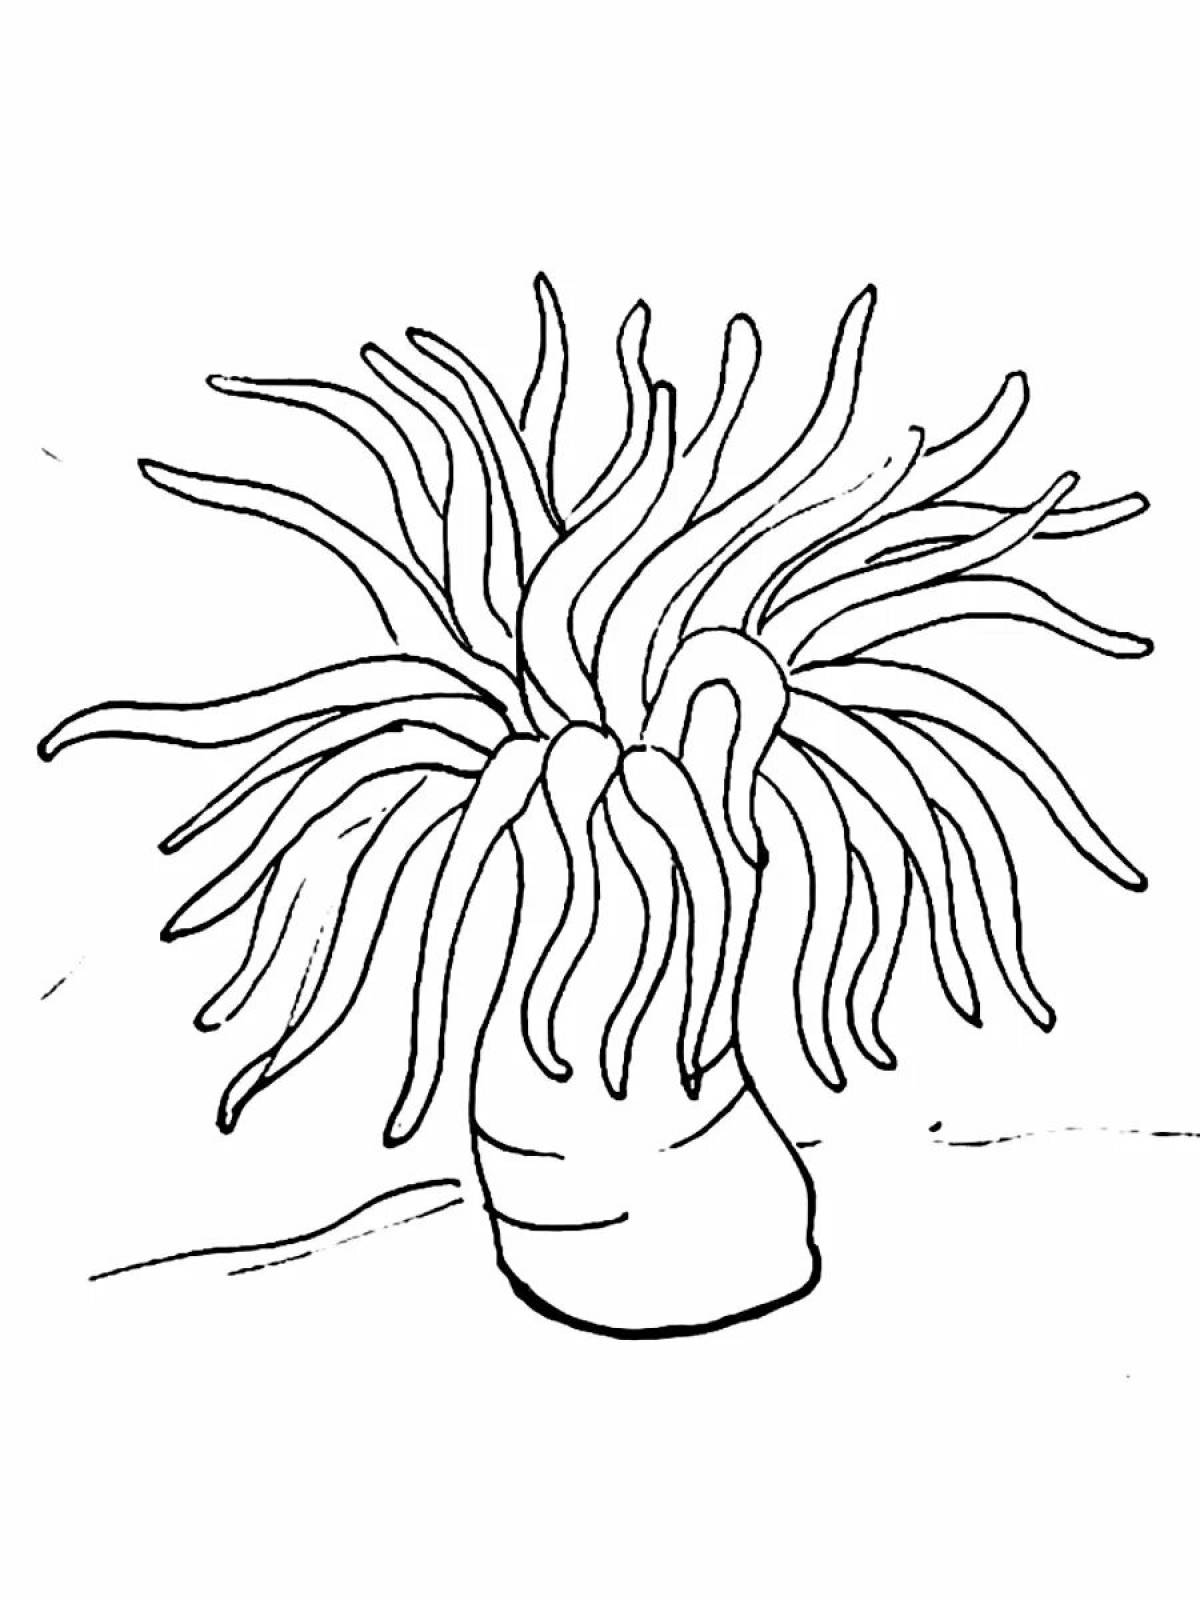 Glittering sea lily coloring page